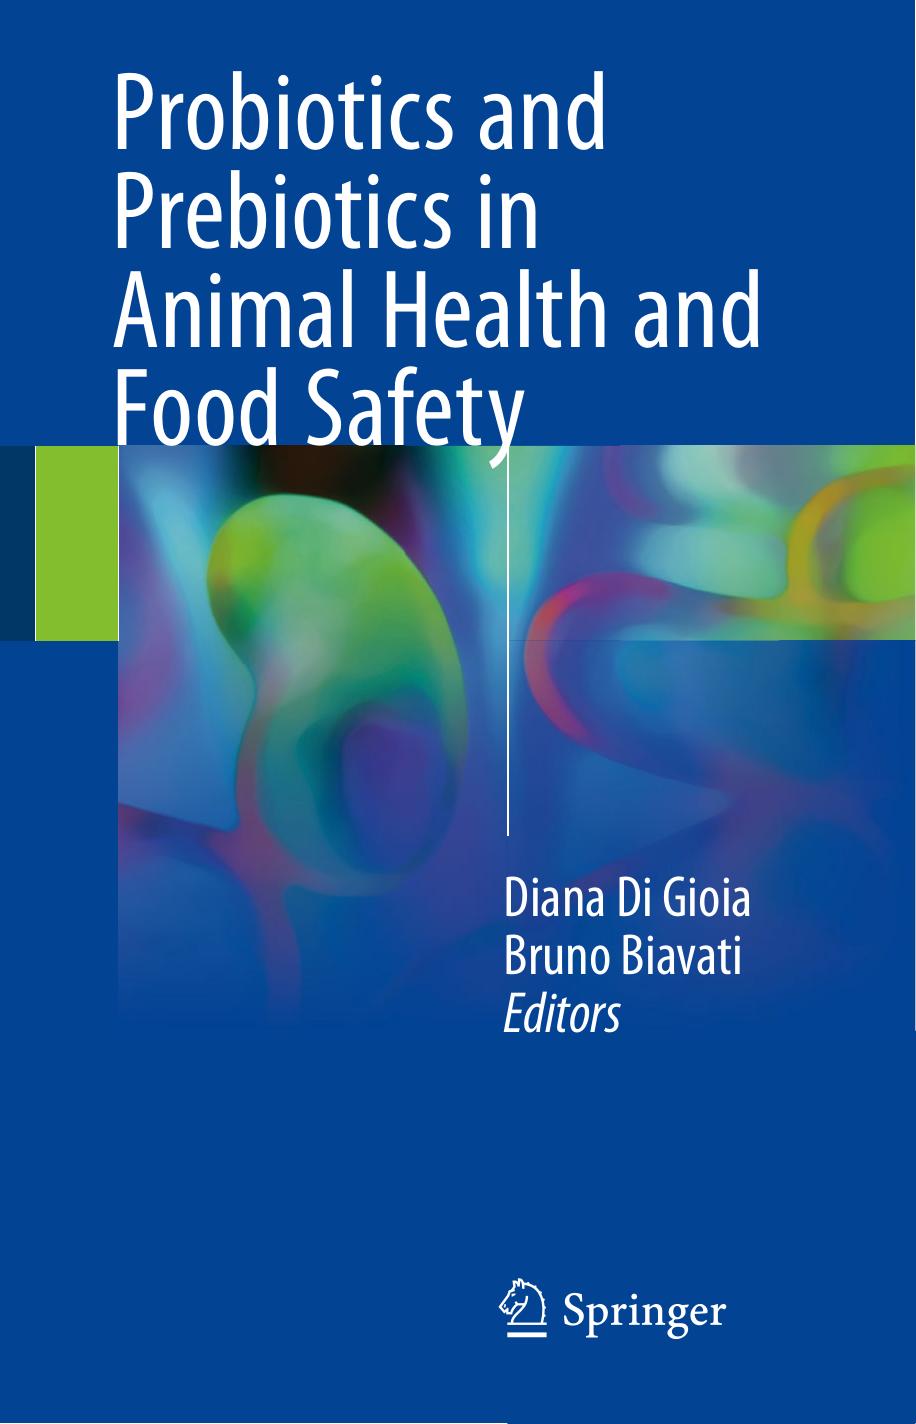 Probiotics and Prebiotics in Animal Health and Food Safety 2018